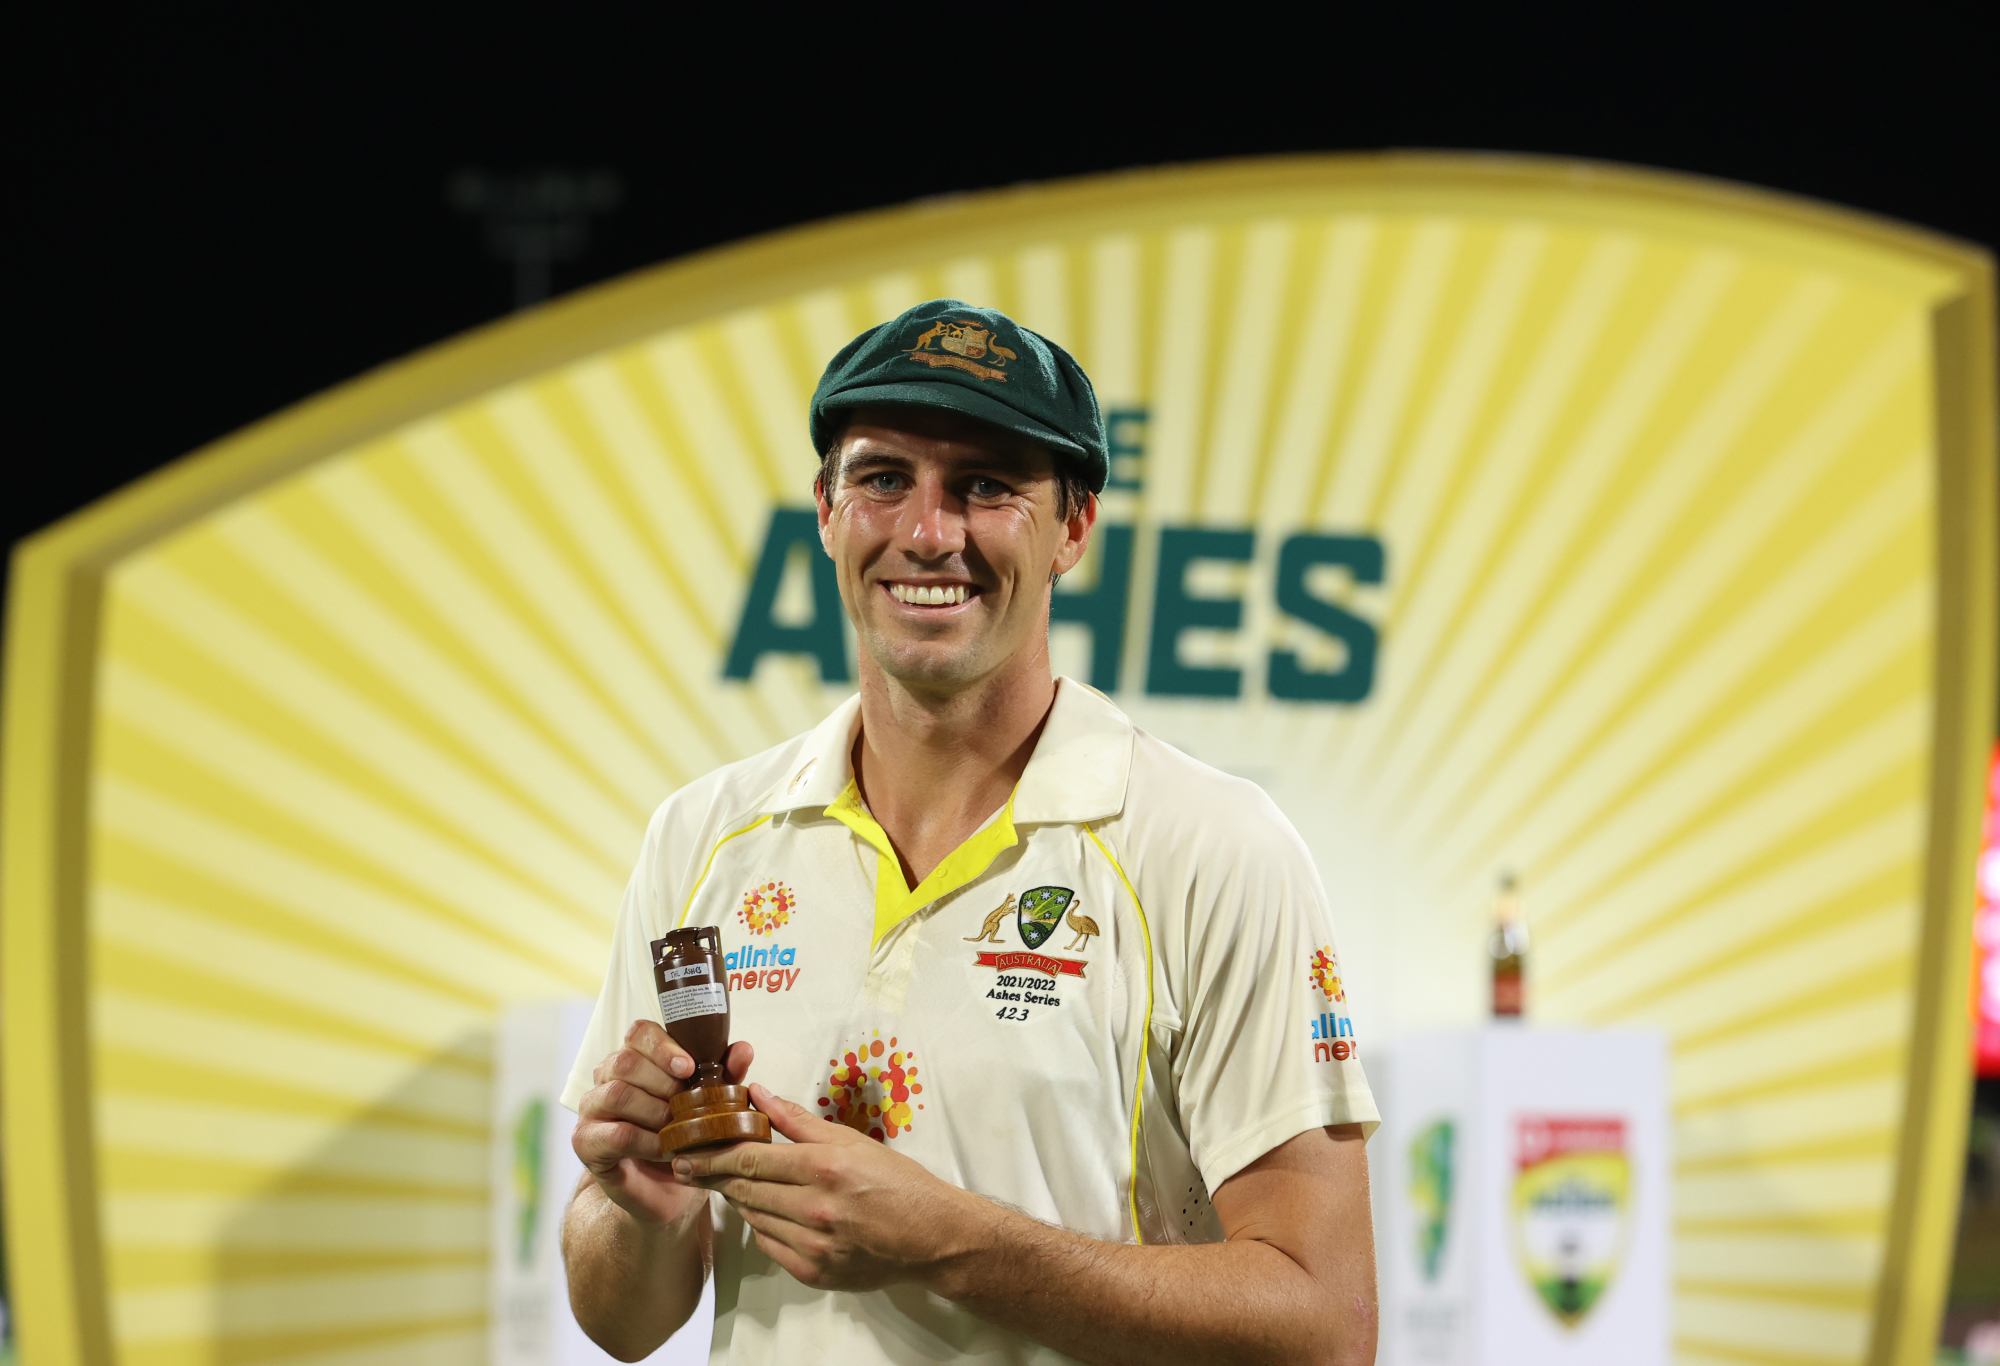 HOBART, AUSTRALIA - JANUARY 16: Pat Cummins of Australia celebrates with the Ashes after winning the Fifth Test in the Ashes series between Australia and England at Blundstone Arena on January 16, 2022 in Hobart, Australia. (Photo by Robert Cianflone/Getty Images)